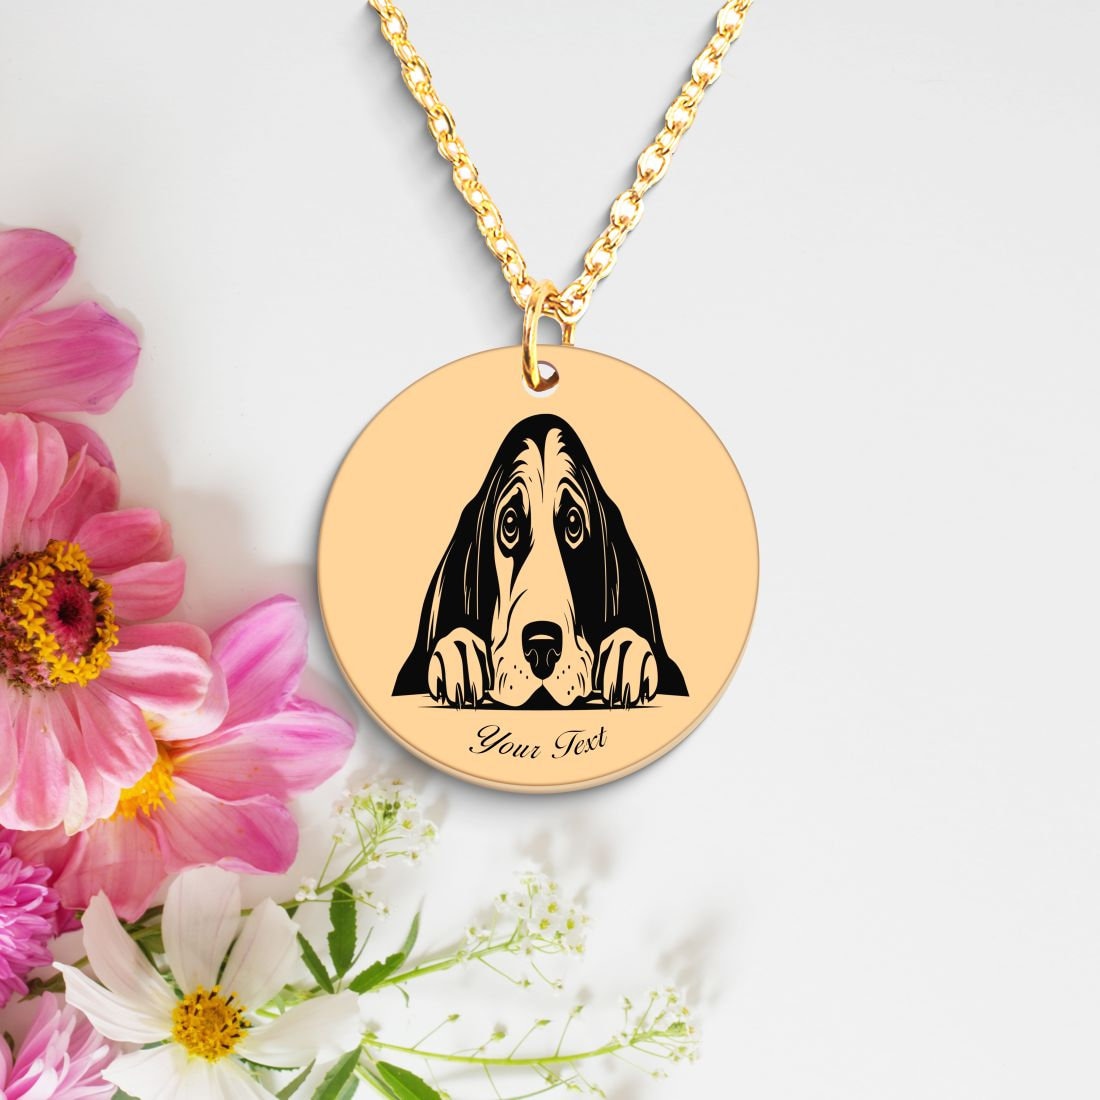 Afghan Hound Dog Portrait Necklace - Personalizable Jewelry